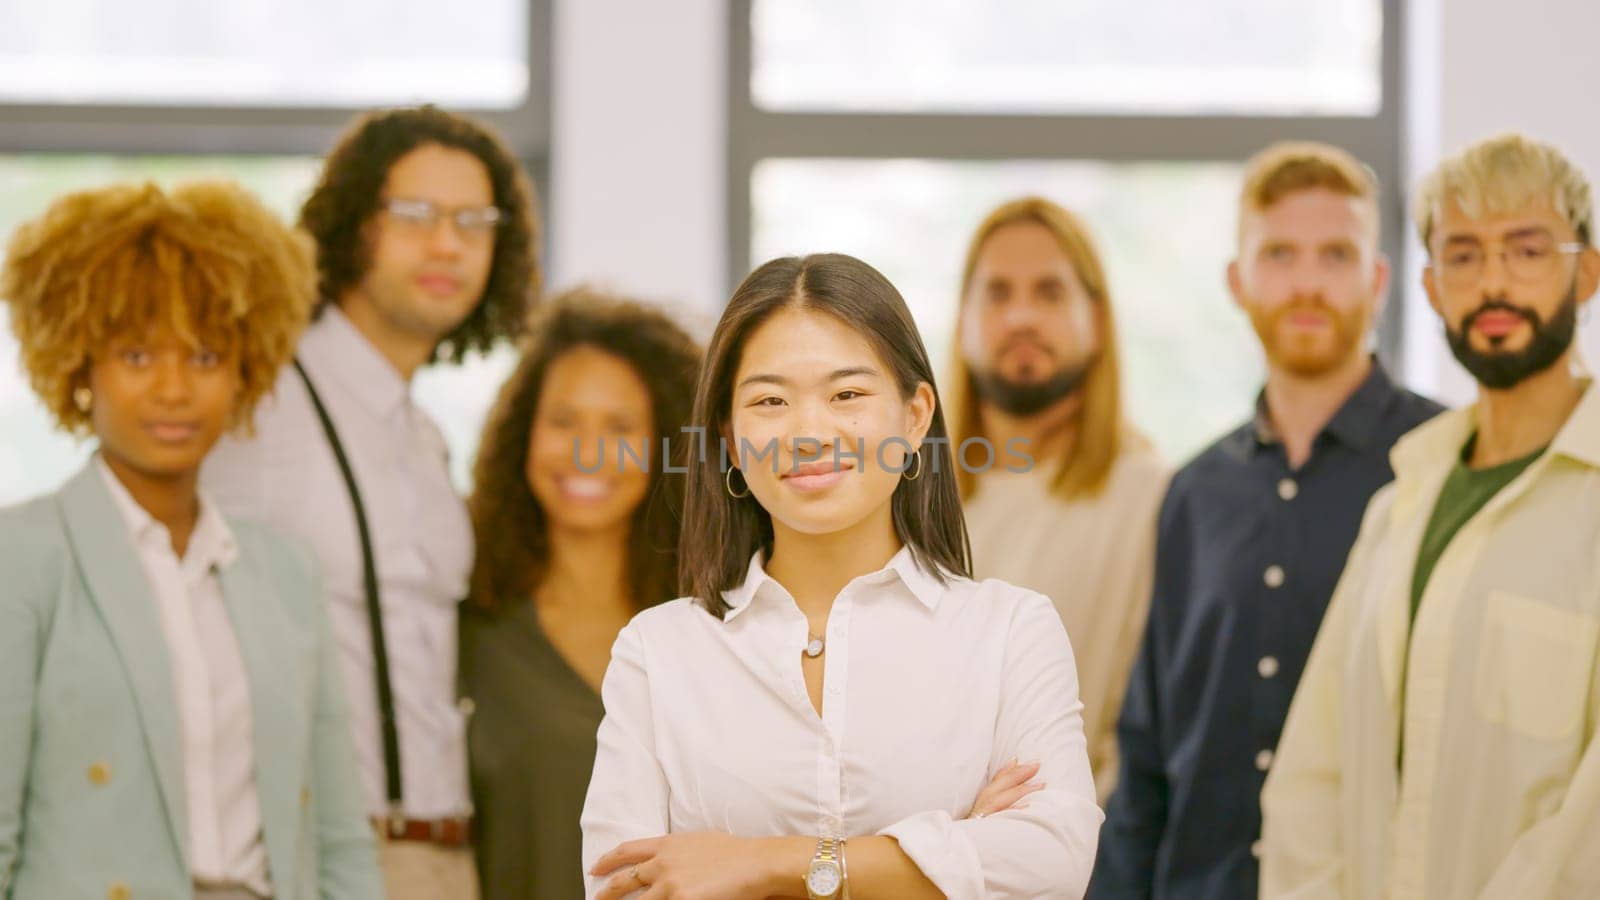 Chinese woman leading a work team in the office standing proud and looking at camera together